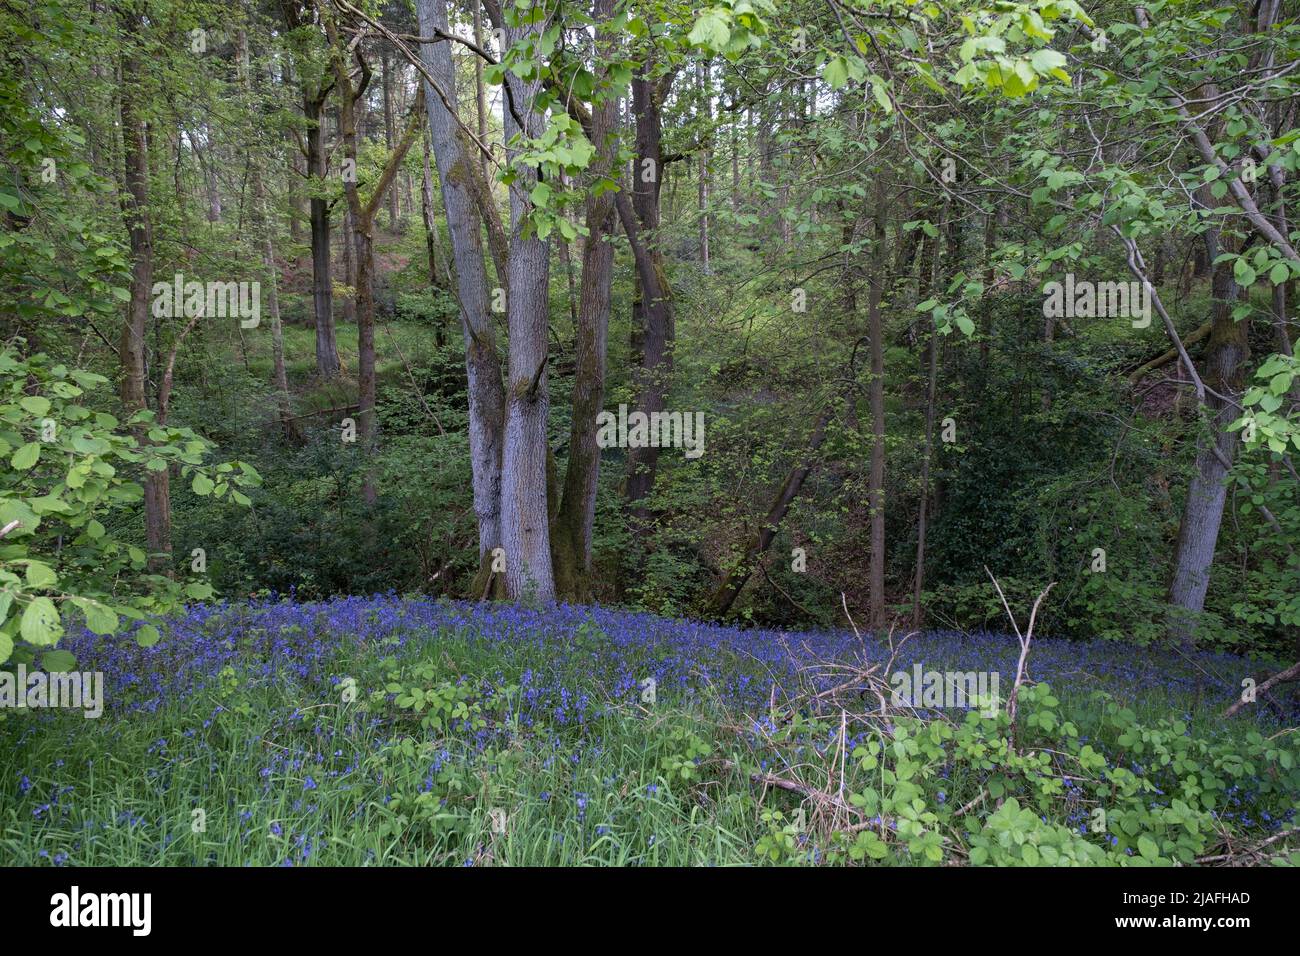 Bluebells in spring woodland on 14th May 2022 in Upper Arley, United Kingdom. Bluebells or H. non-scripta is particularly associated with ancient woodland where it may dominate the woodland floor to produce carpets of violet–blue flowers in bluebell woods, but also occurs in more open habitats in western regions. It is protected under UK law. Bannams Wood is a small piece of ancient woodland, part of the original Wildwood which coverered the UK many thousands of years ago. British wildwood, or simply the wildwood, is the wholly natural landscape which developed across major parts of England af Stock Photo